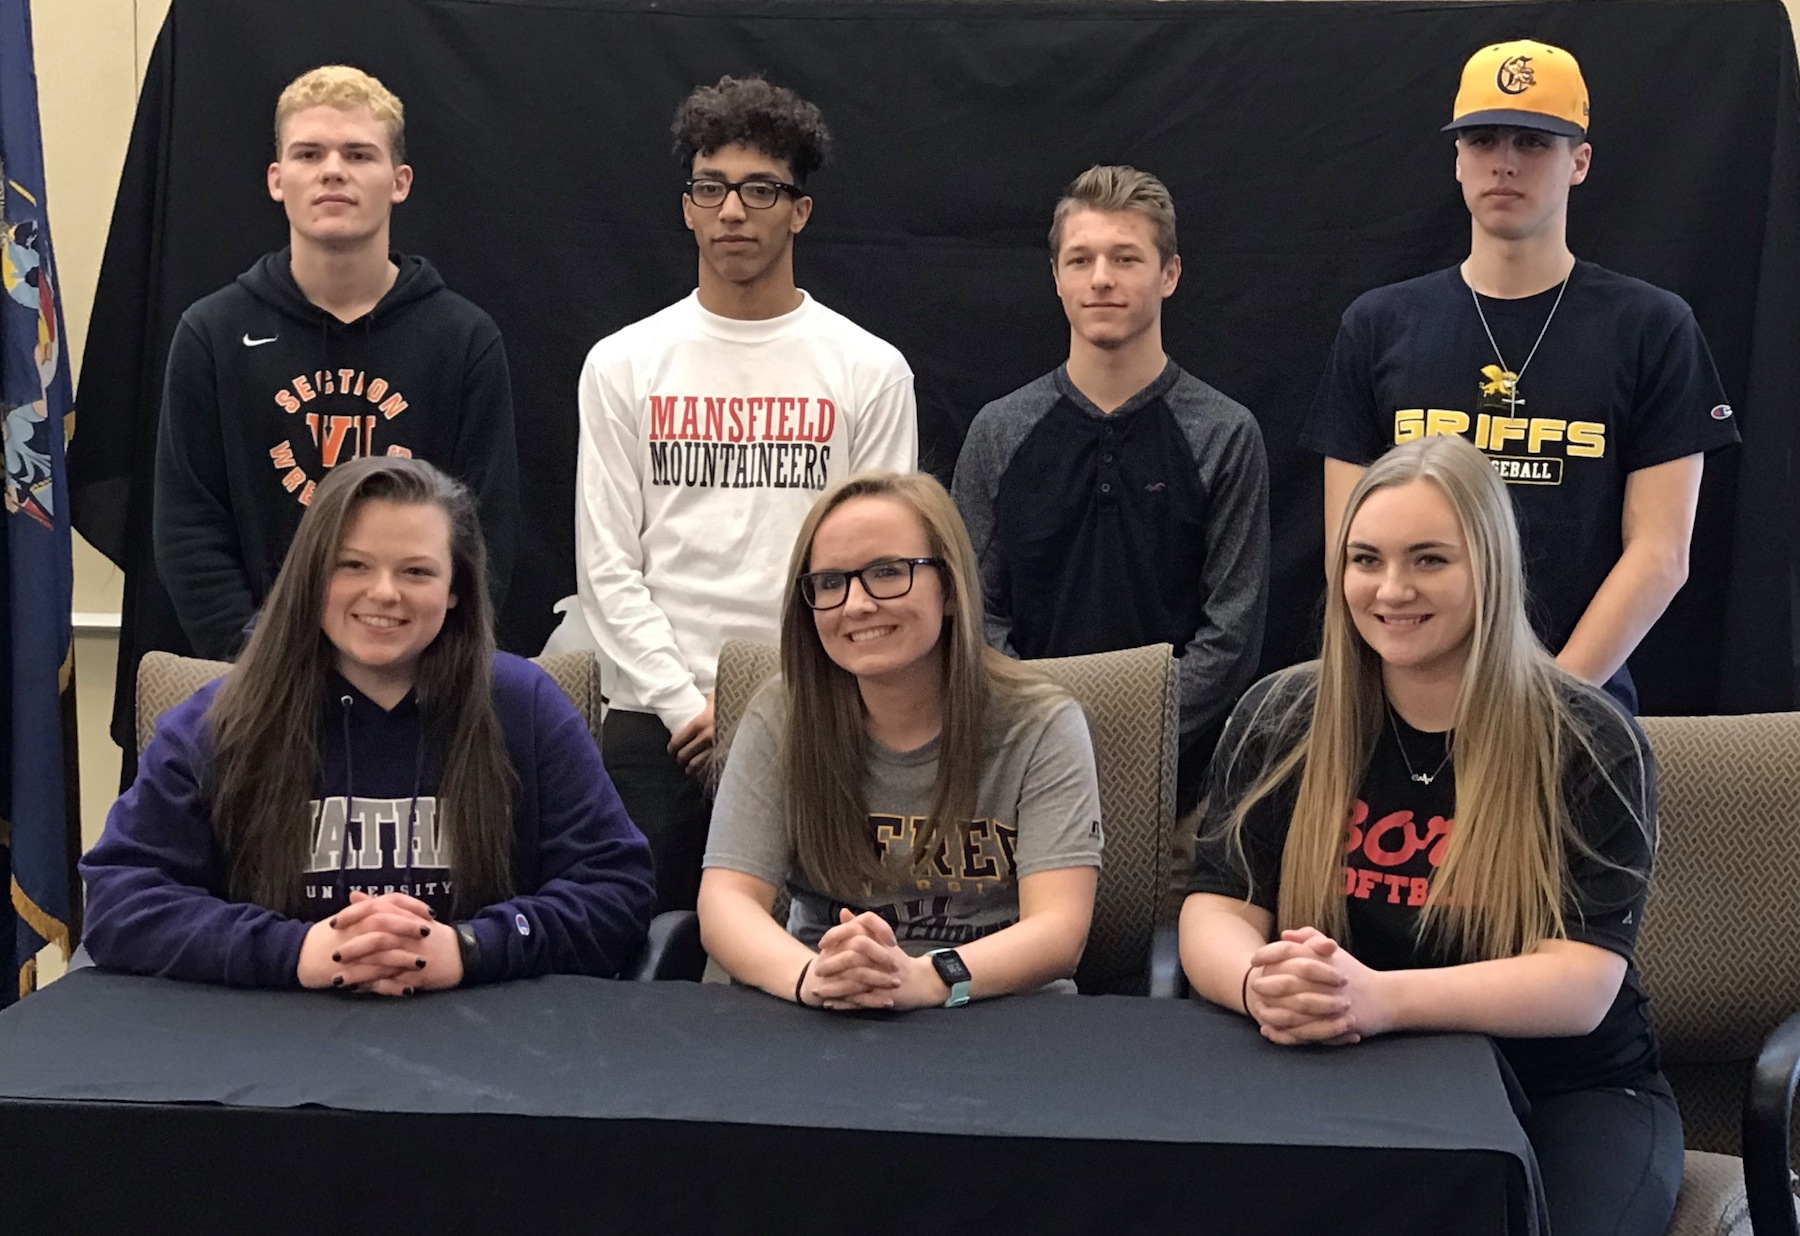 The seven seniors who sign to extend their athletic careers into college. From left, back row, Josh Thibeault, Jordan Parks, Nick Stott and Tom Peltier. Front row, Selena Justus, Mackenzie Grosskopf and Mackenzie Quider. (Photos by David Yarger)